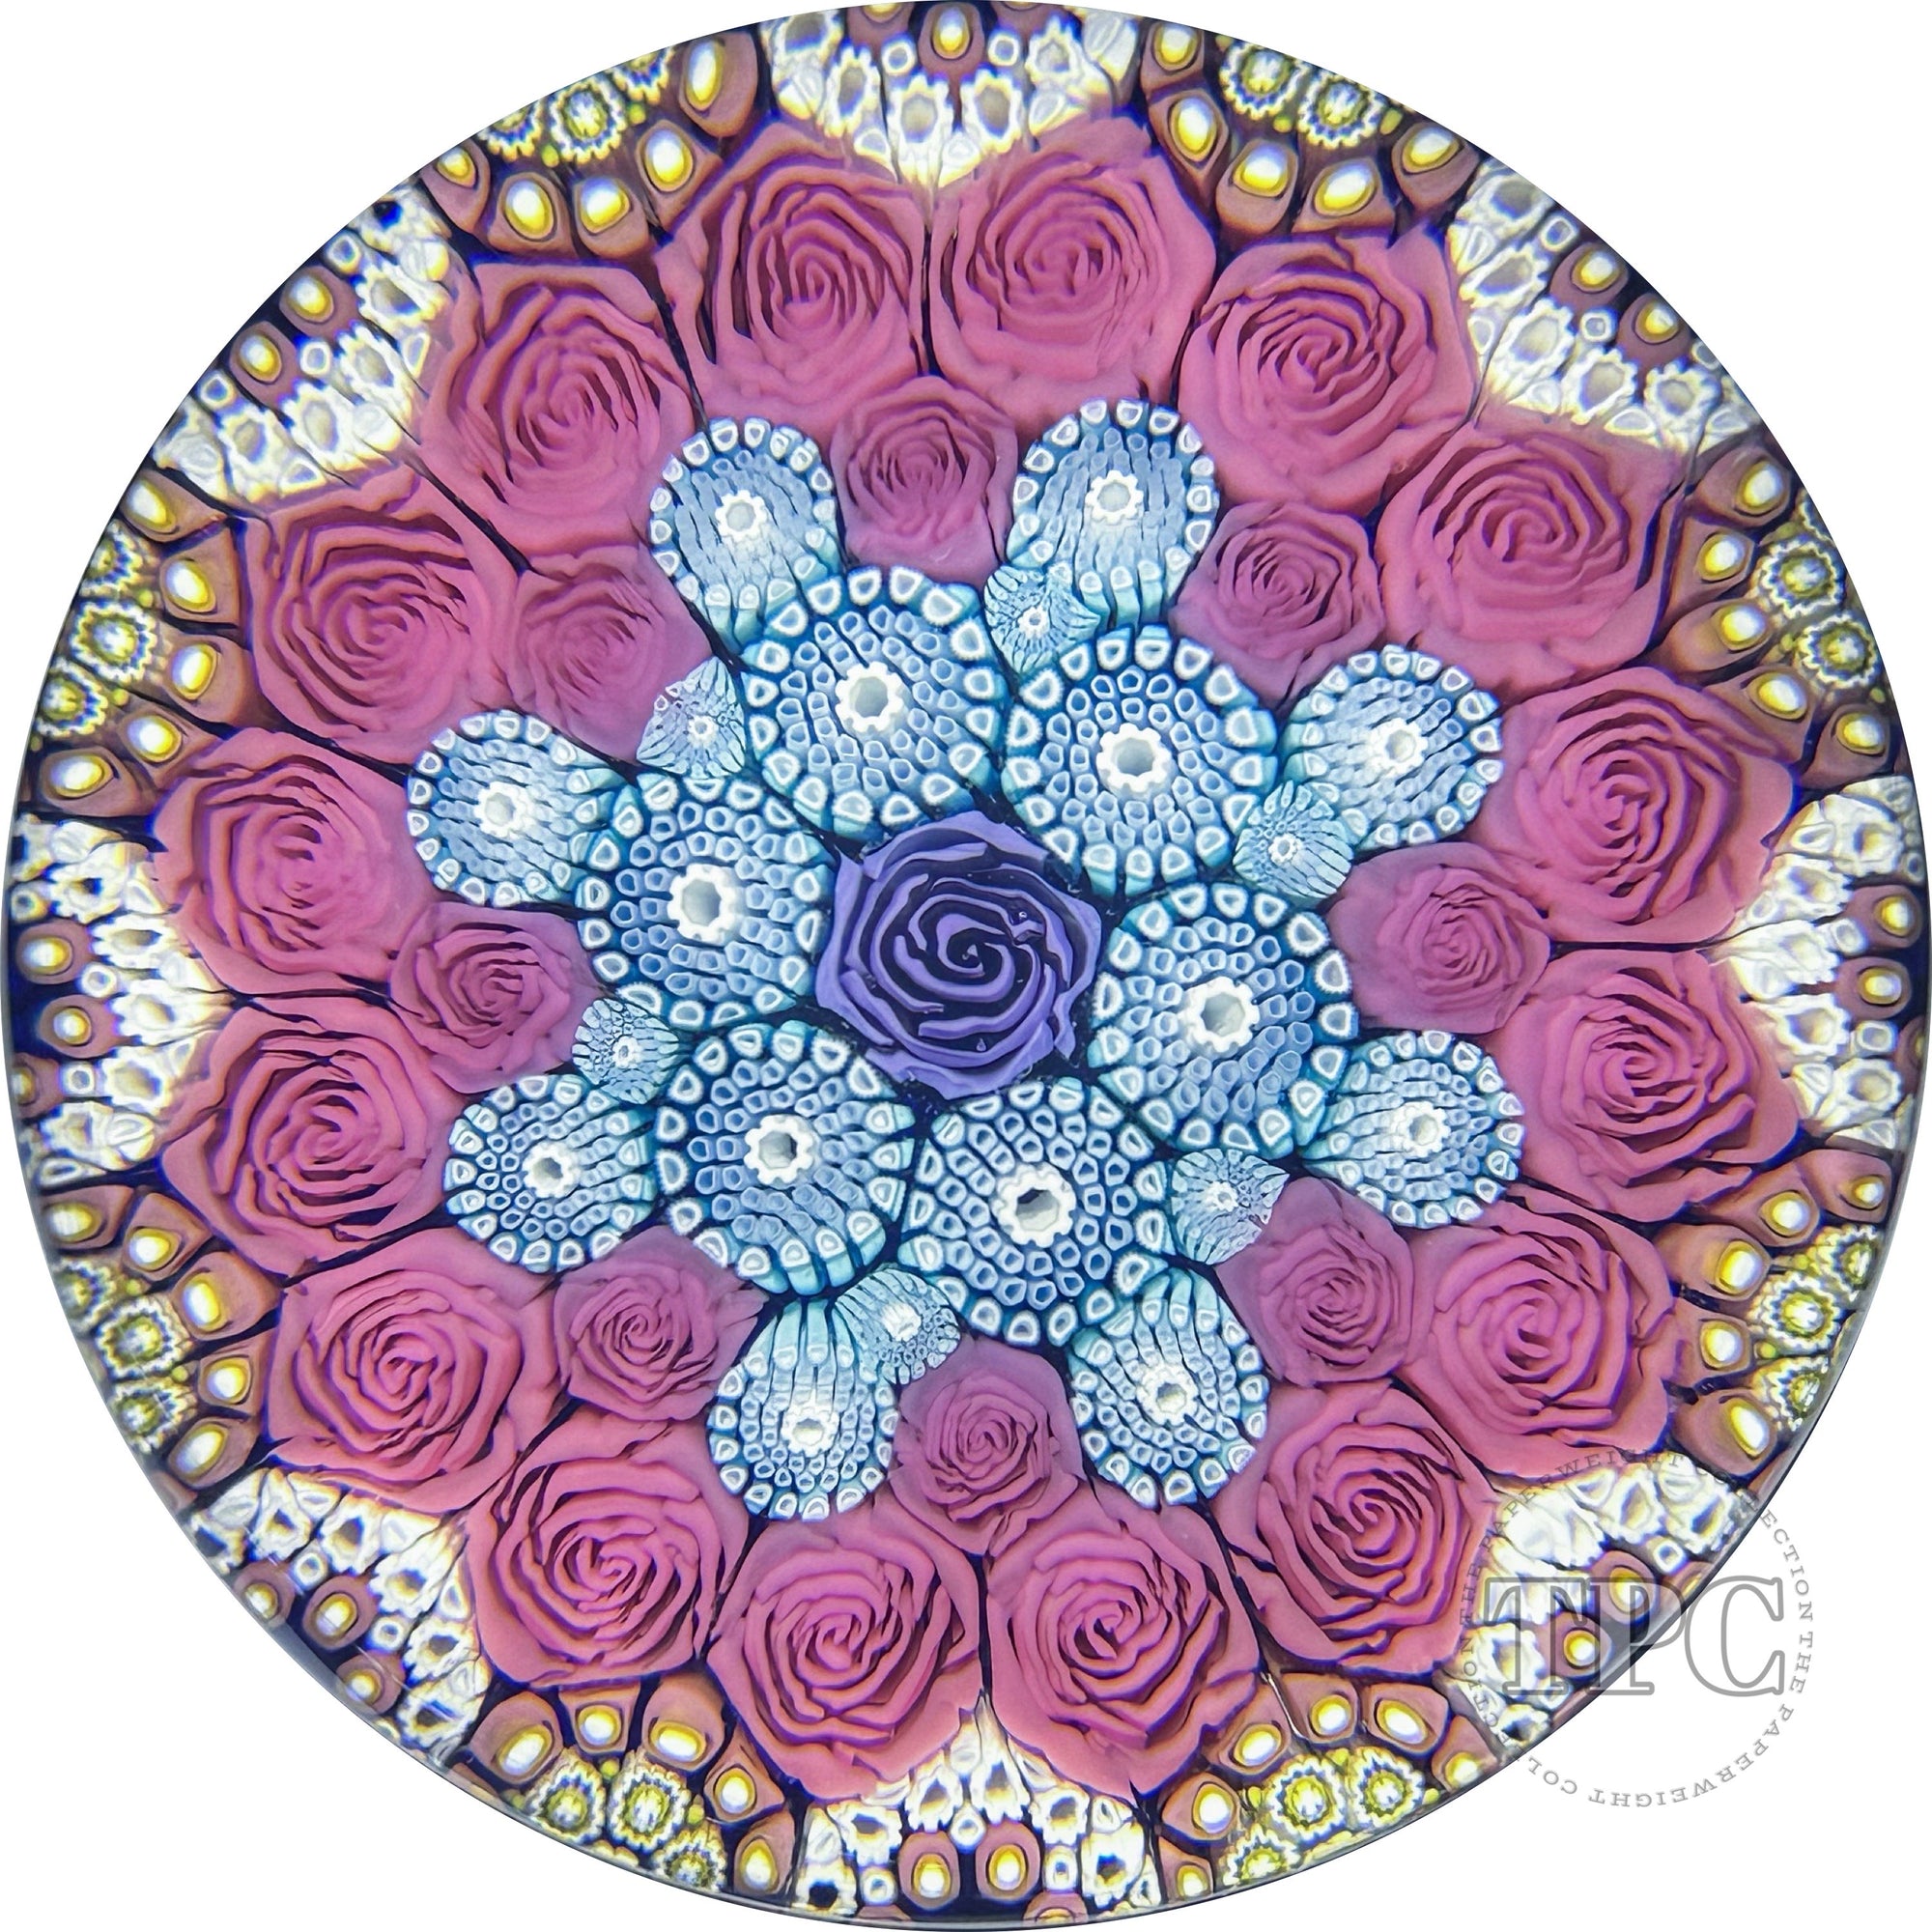 Michael Hunter 2019 Glass Art Paperweight Patterned Complex Millefiori with Roses